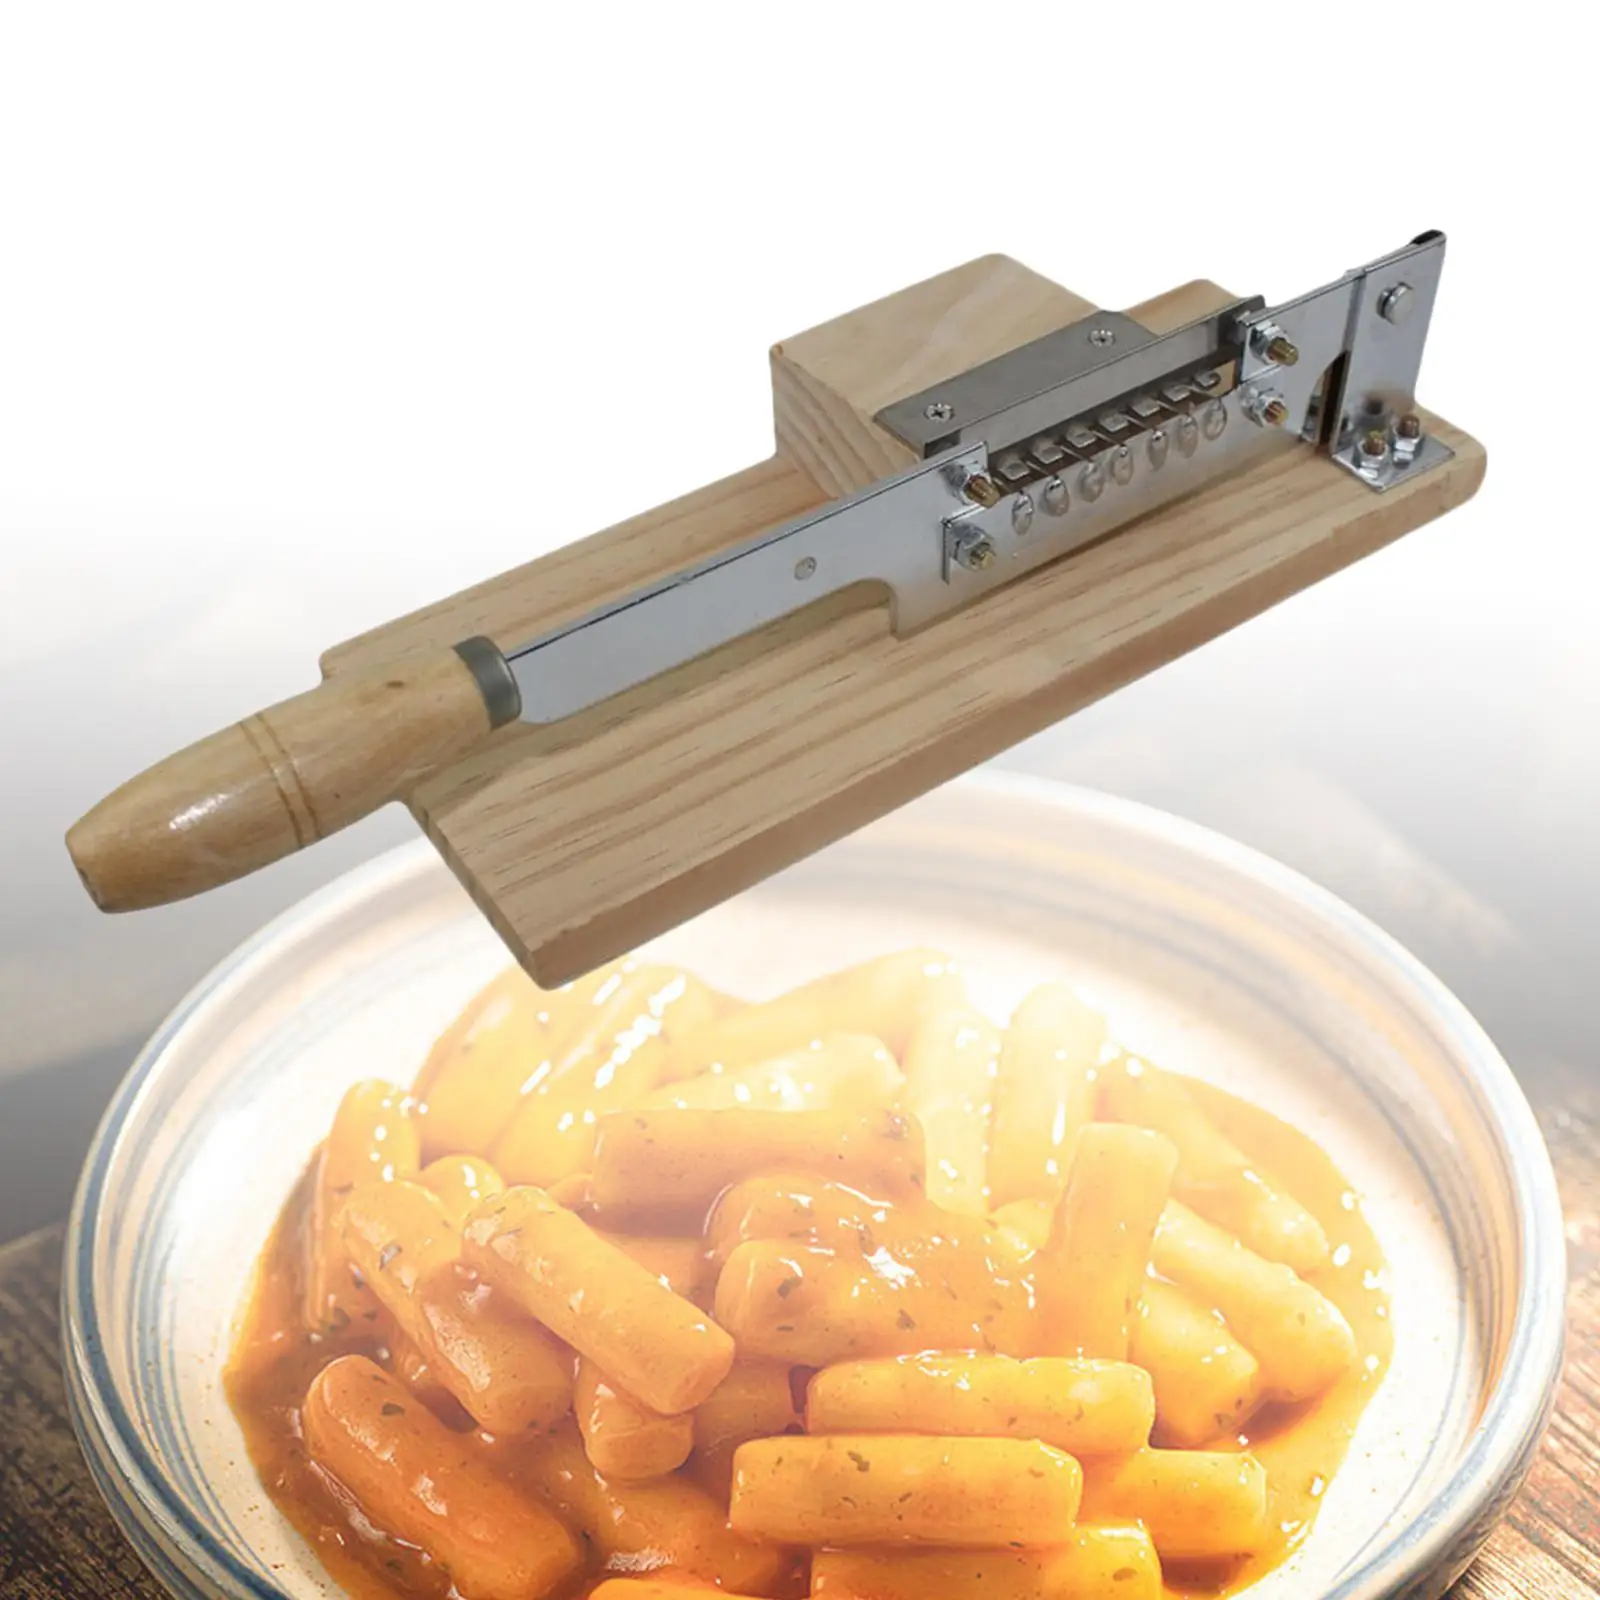 Potato Cutter Chopper Slicer with Wood Handle Kitchen Tool French Fries Cutter Potato Slicer Cutter for Cheese Carrot Grill Bake